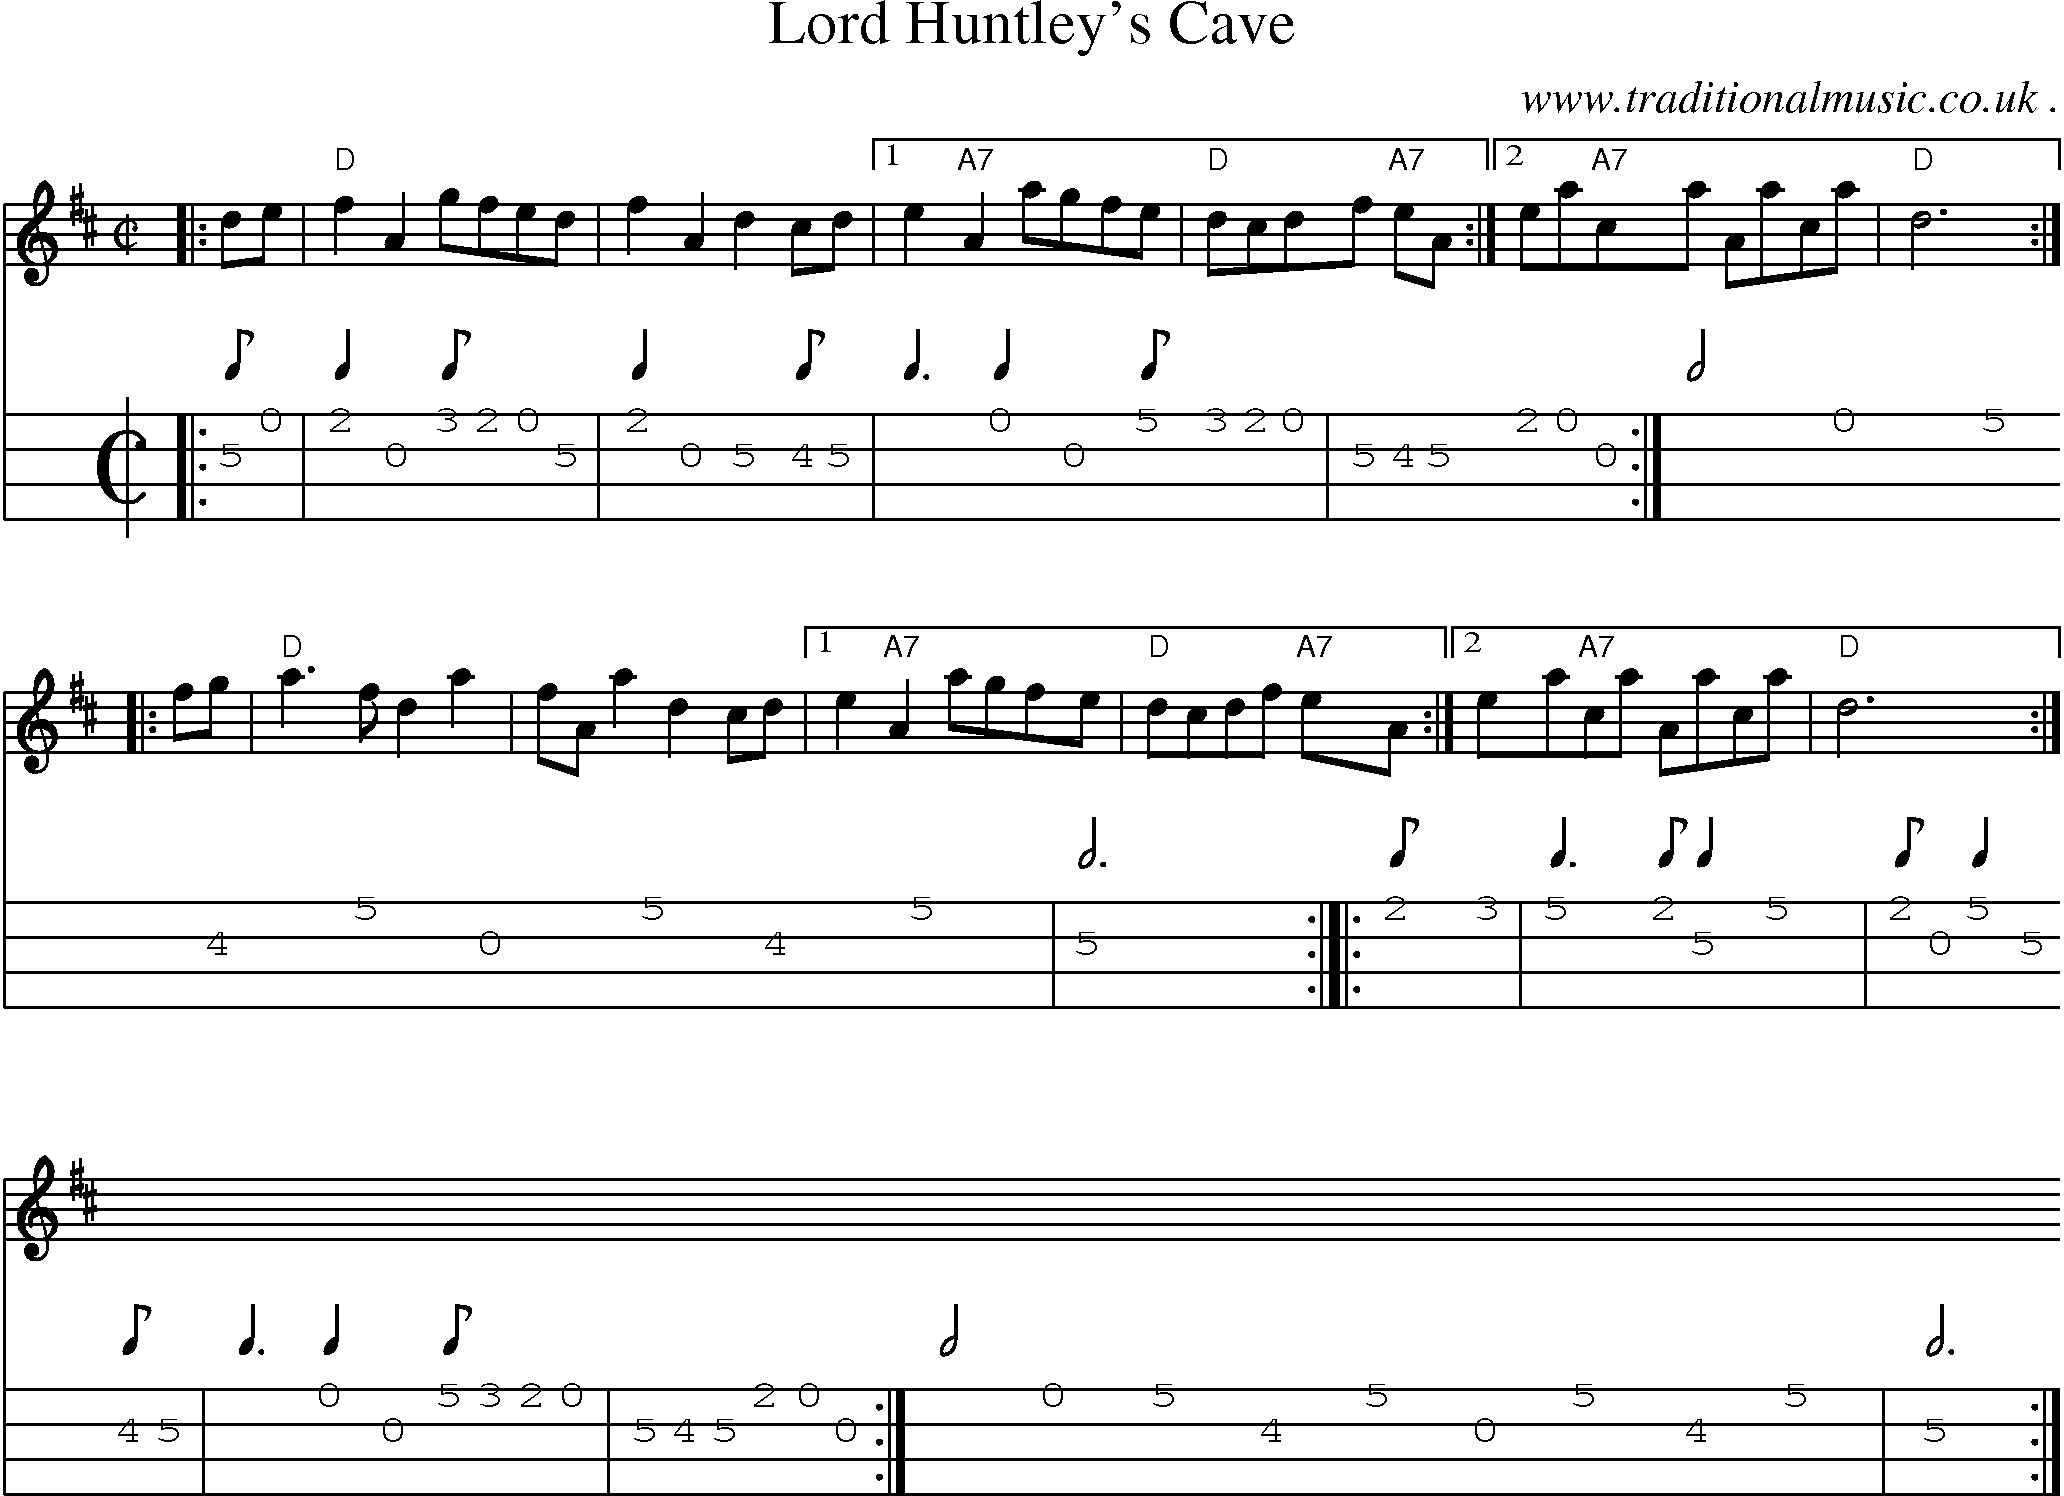 Sheet-music  score, Chords and Mandolin Tabs for Lord Huntleys Cave